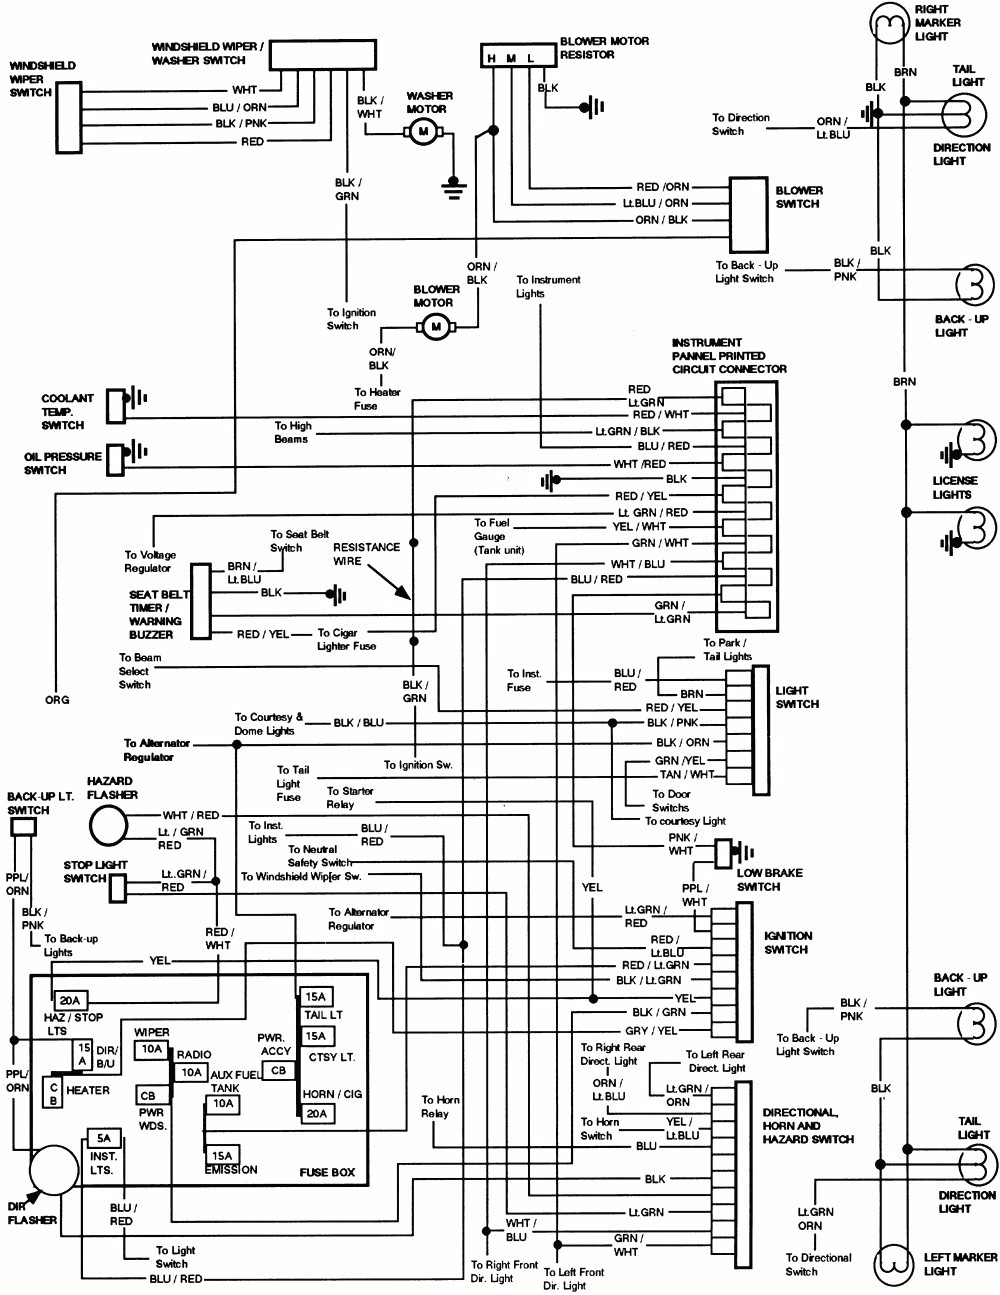 1990 ford f150 starter solenoid wiring diagram awesome 86 engine diagrams schematics of 1987 1 random jpg